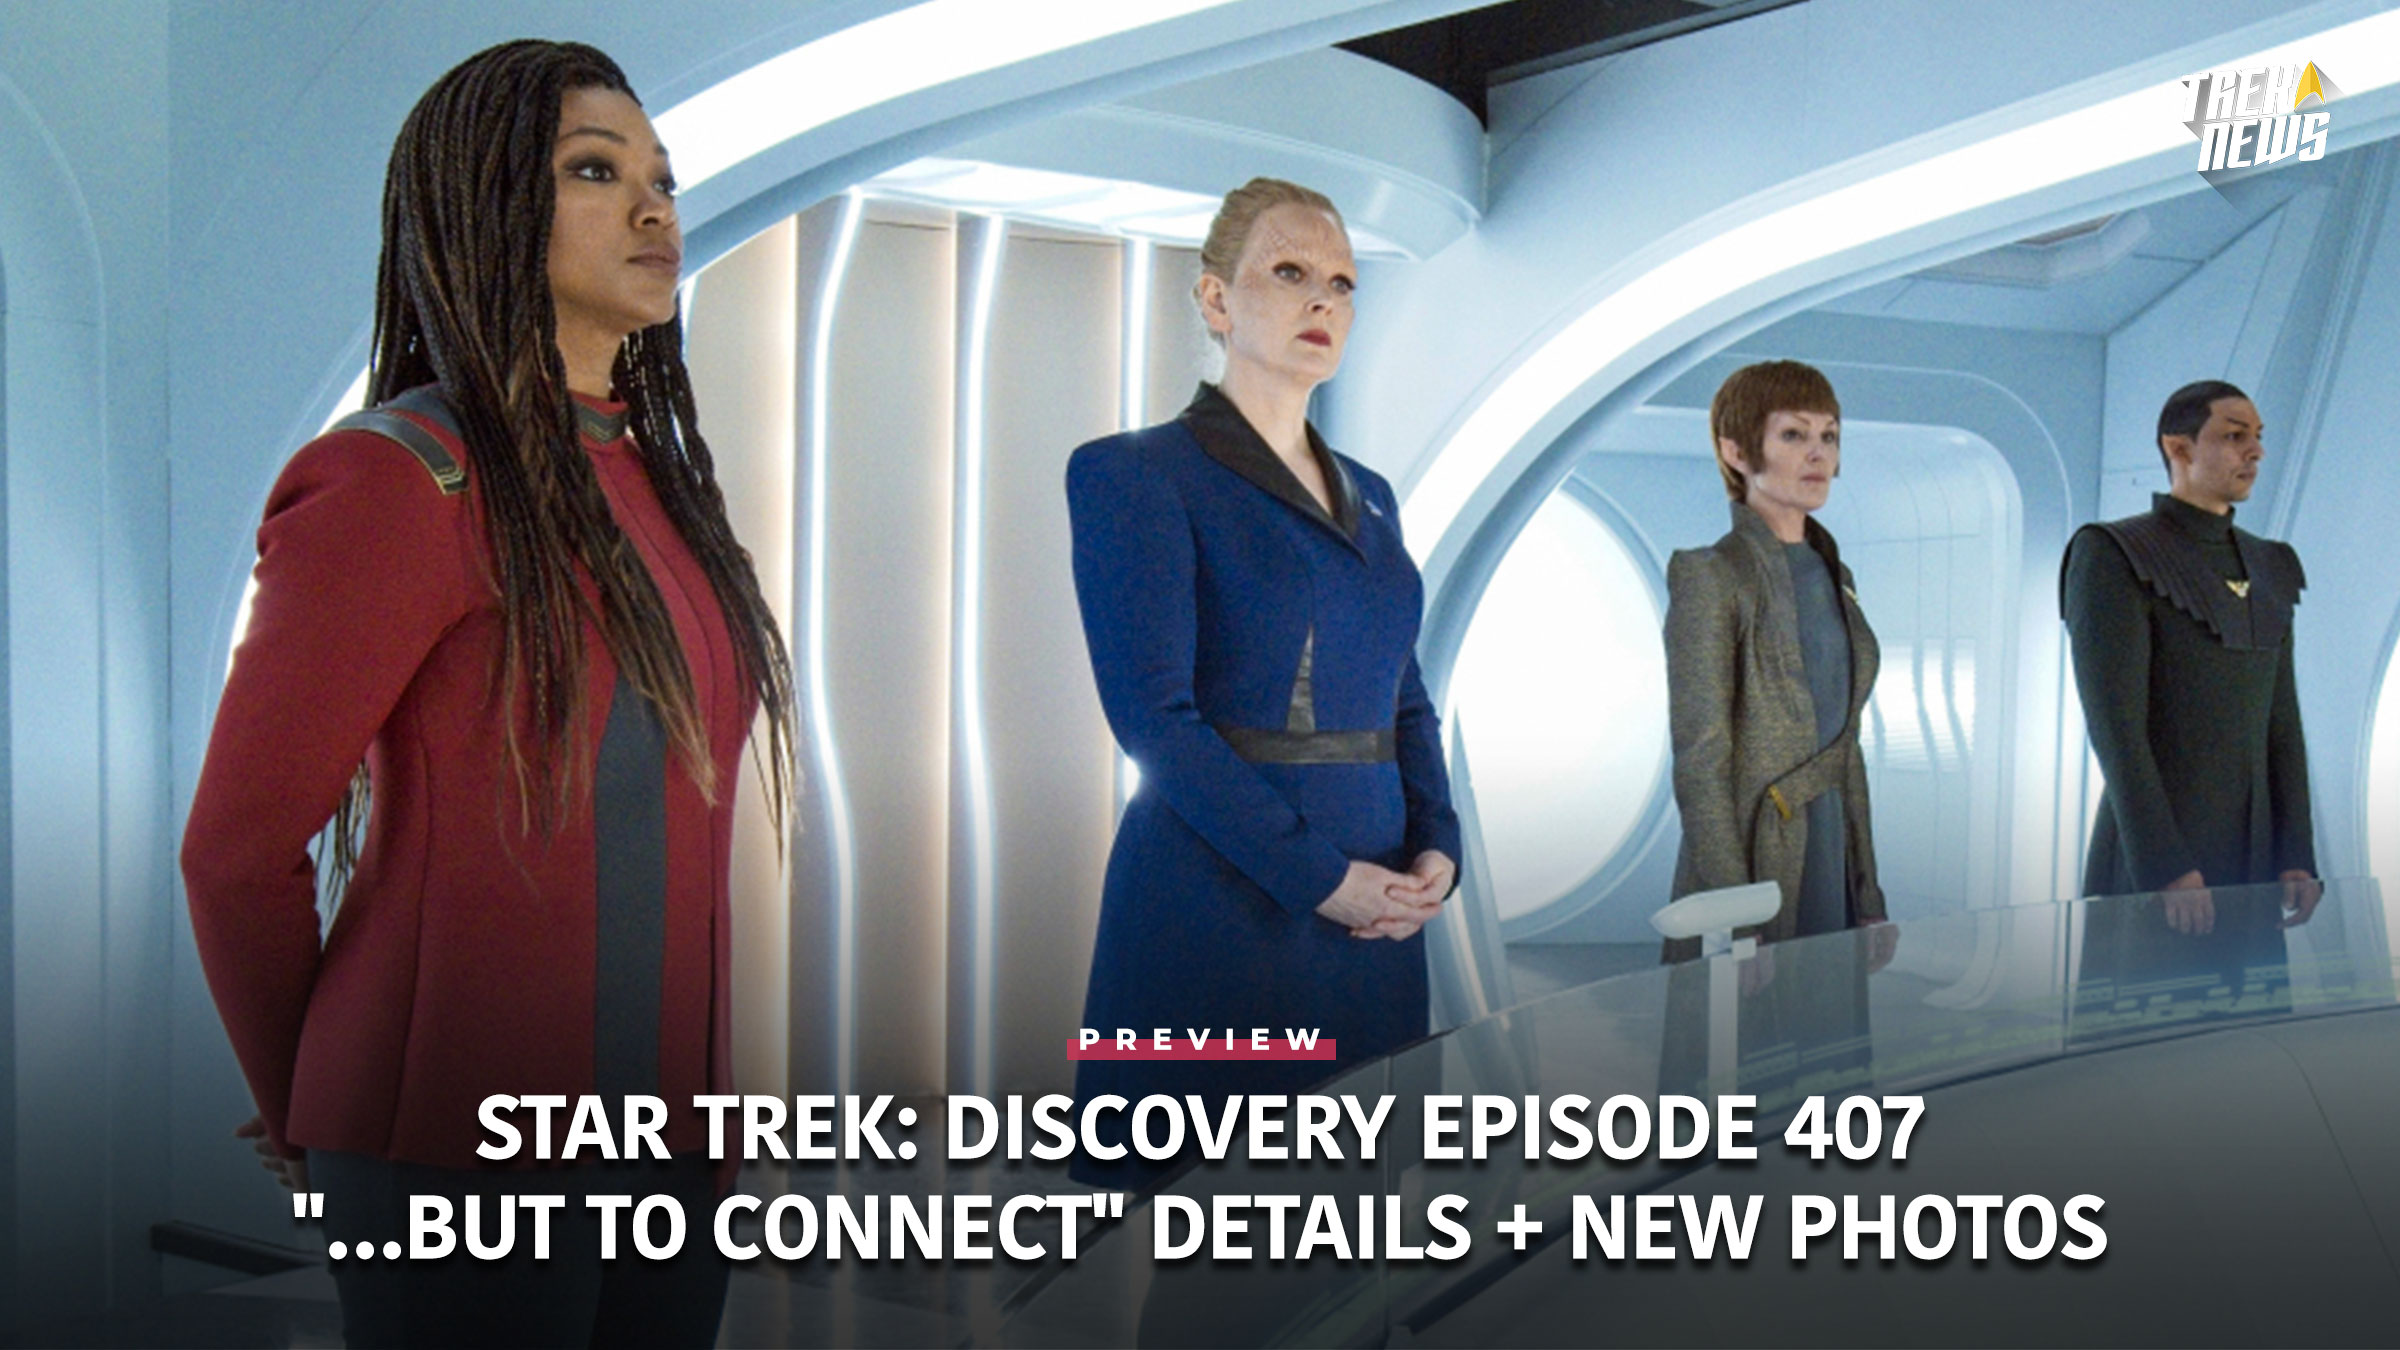 Star Trek: Discovery Episode 407 “…But To Connect” Preview + New Photos